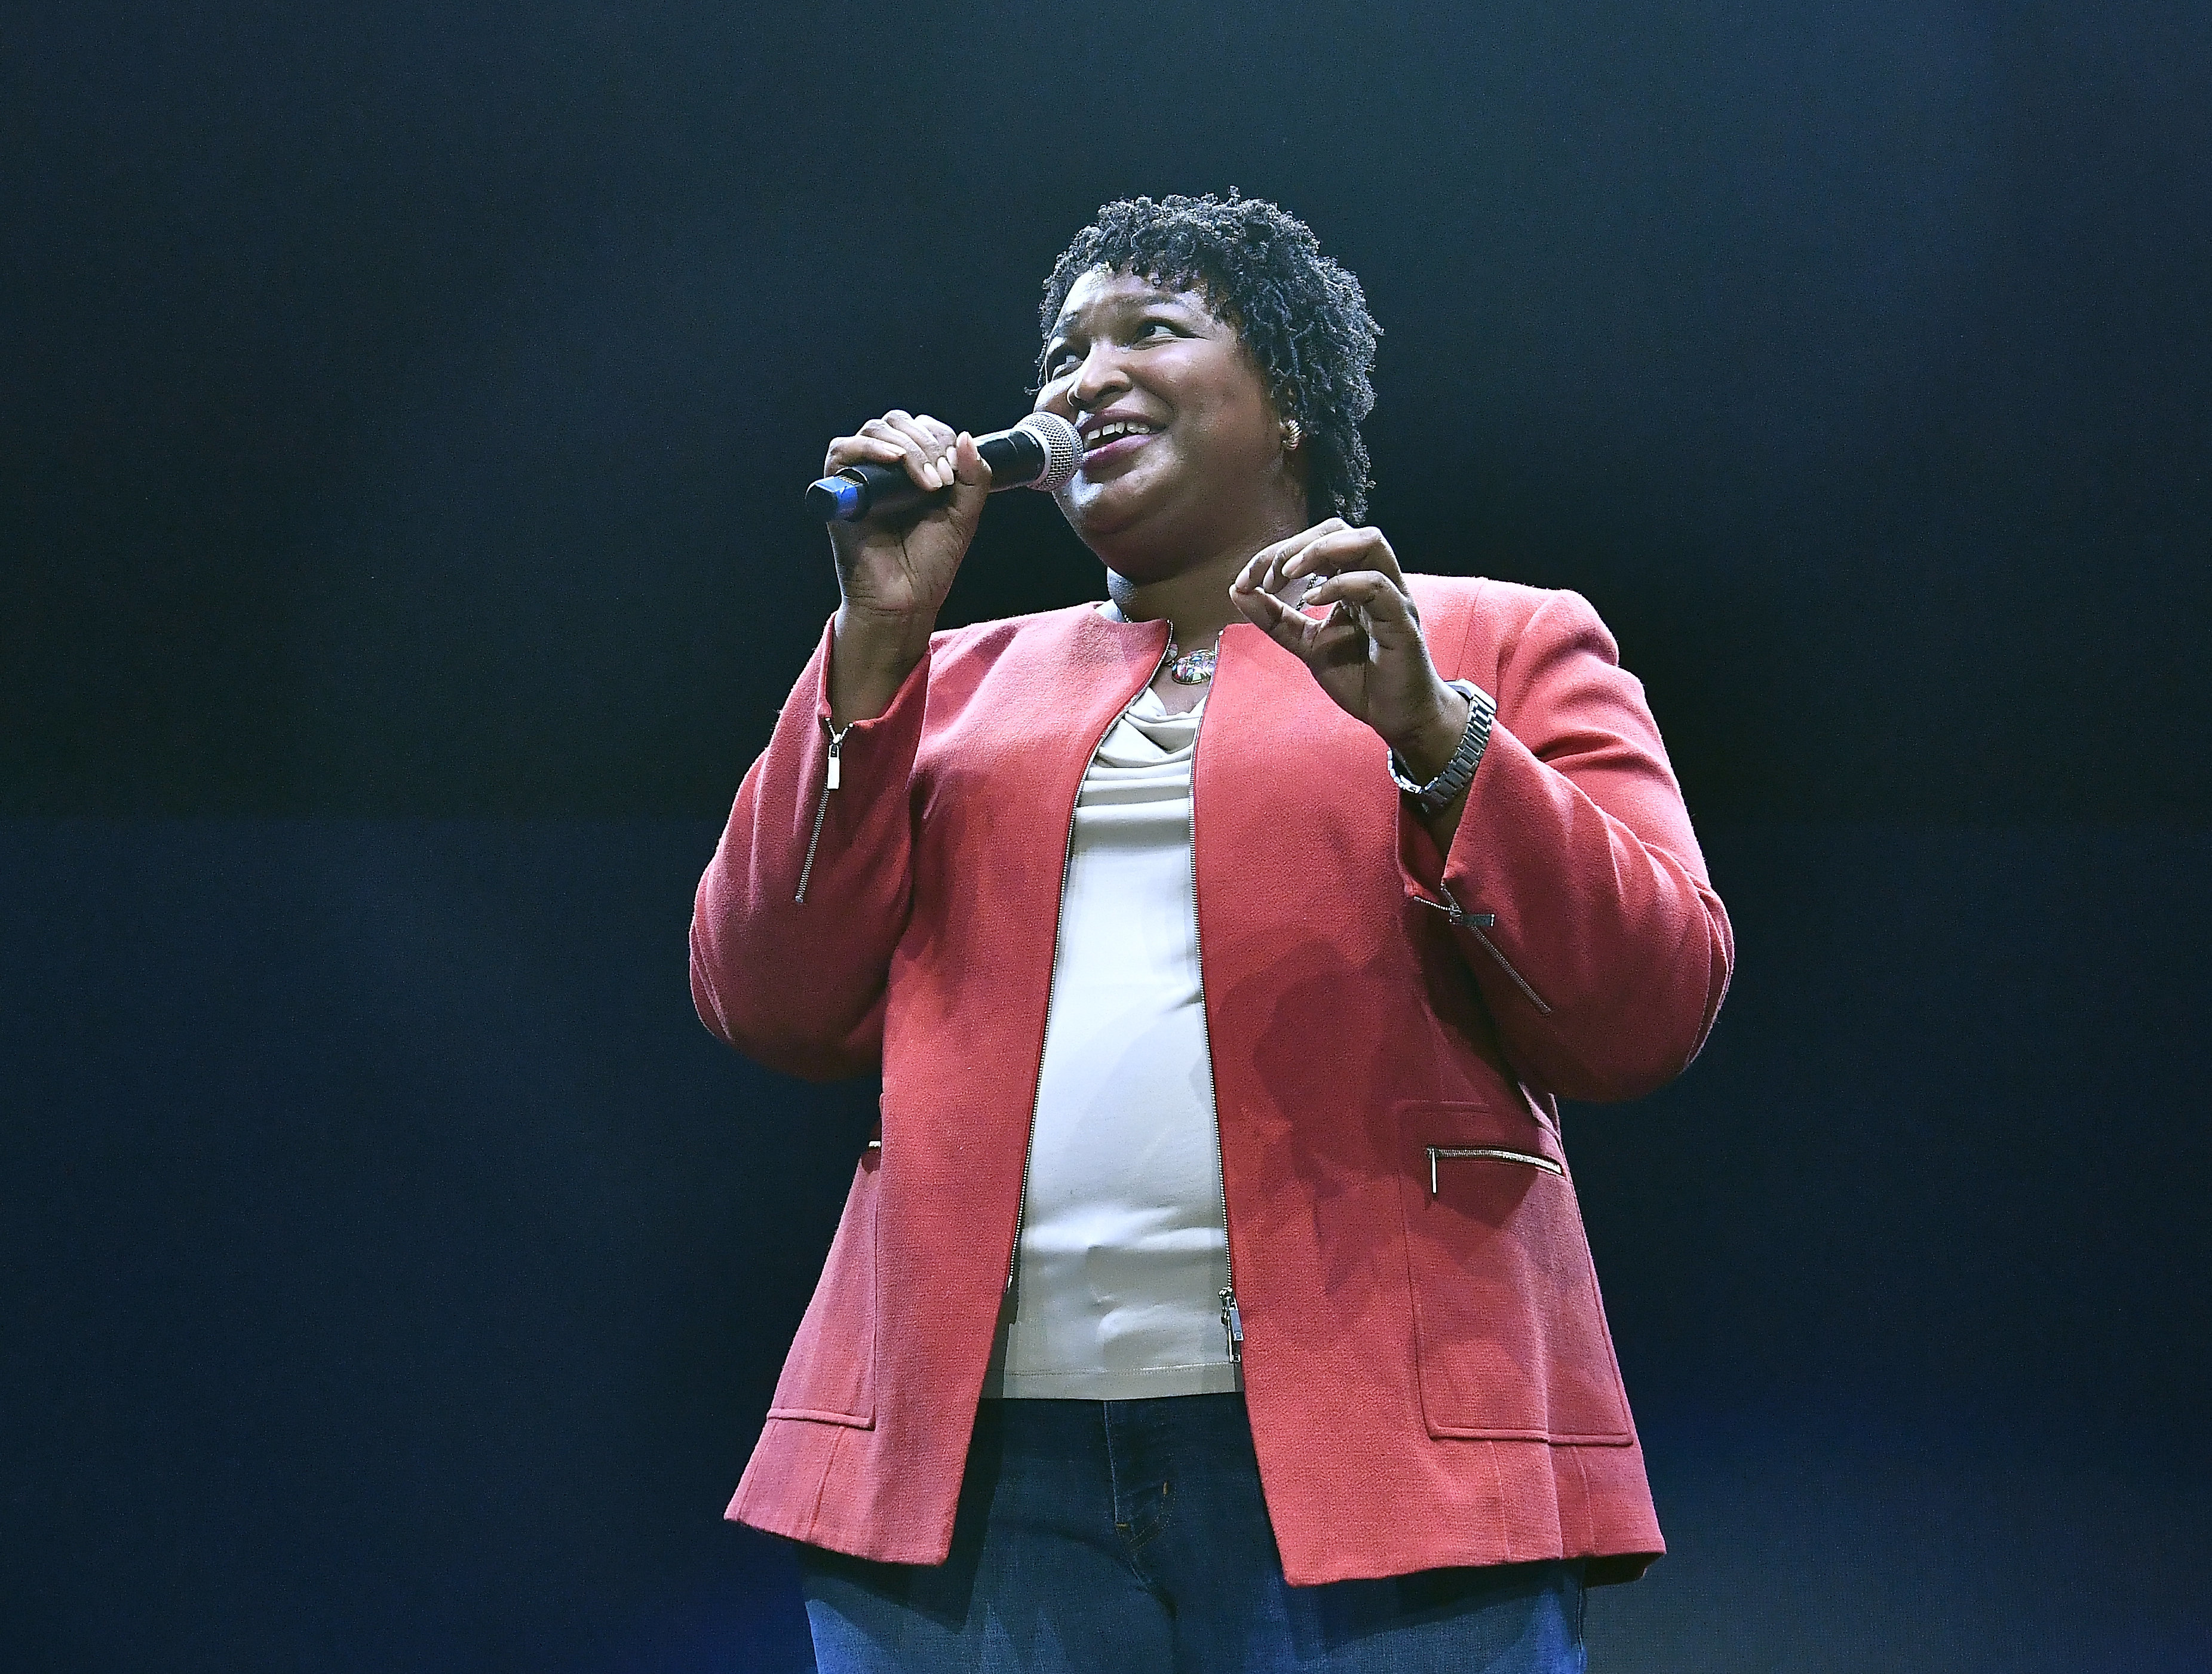 Stacey Abrams defends 1992 flag burning protest: 'I'm a very proud Georgian'